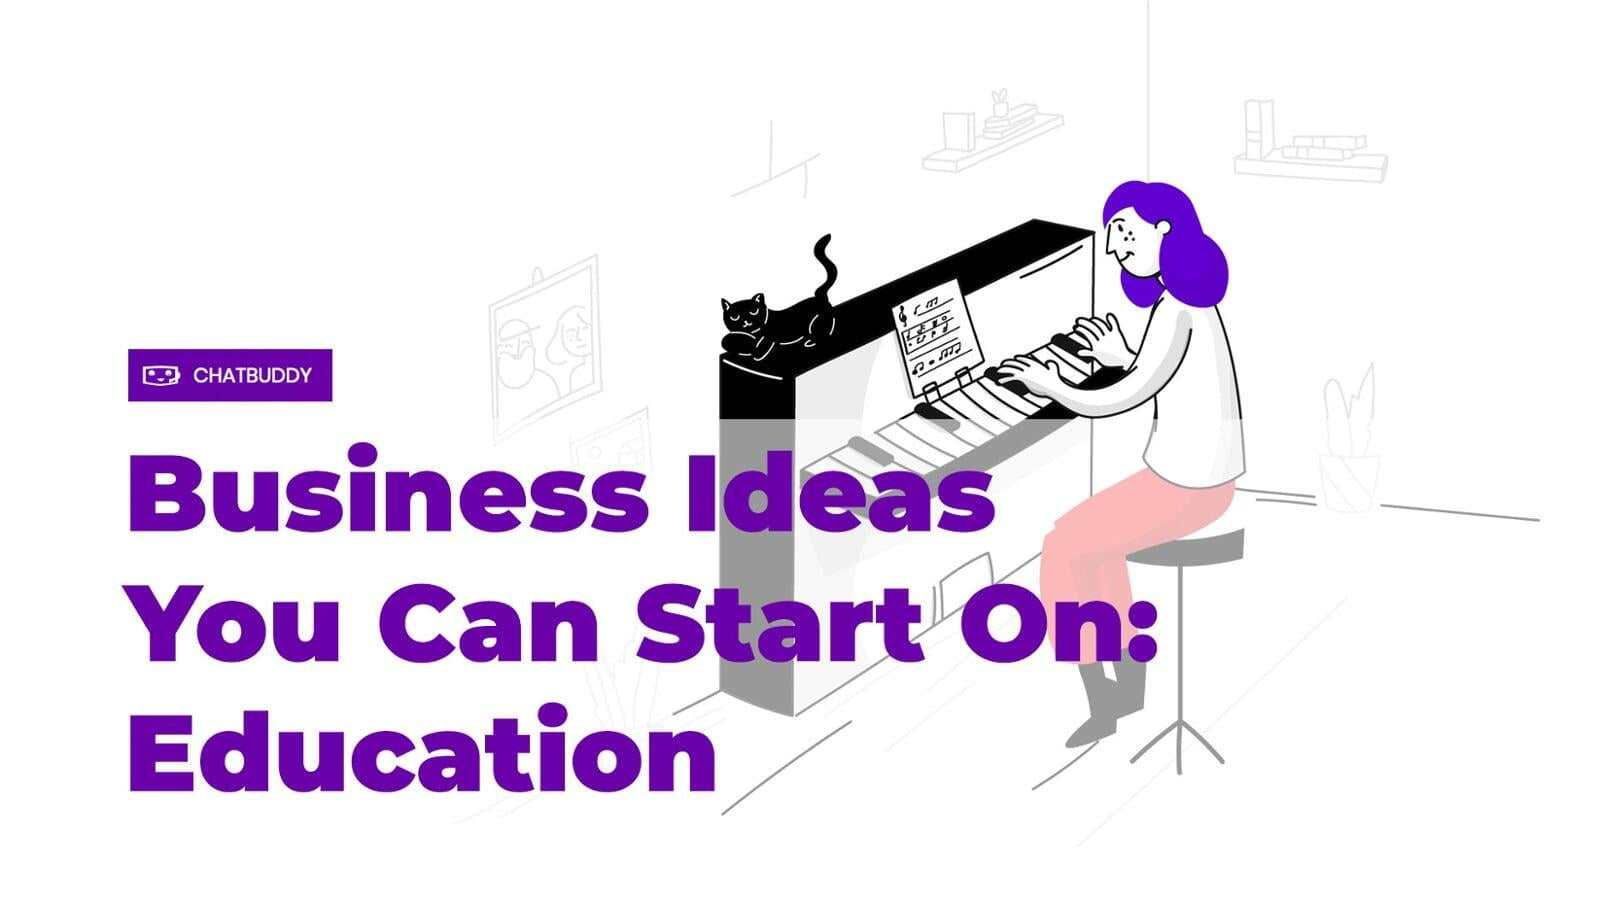 Business Ideas You Can Start On: Education